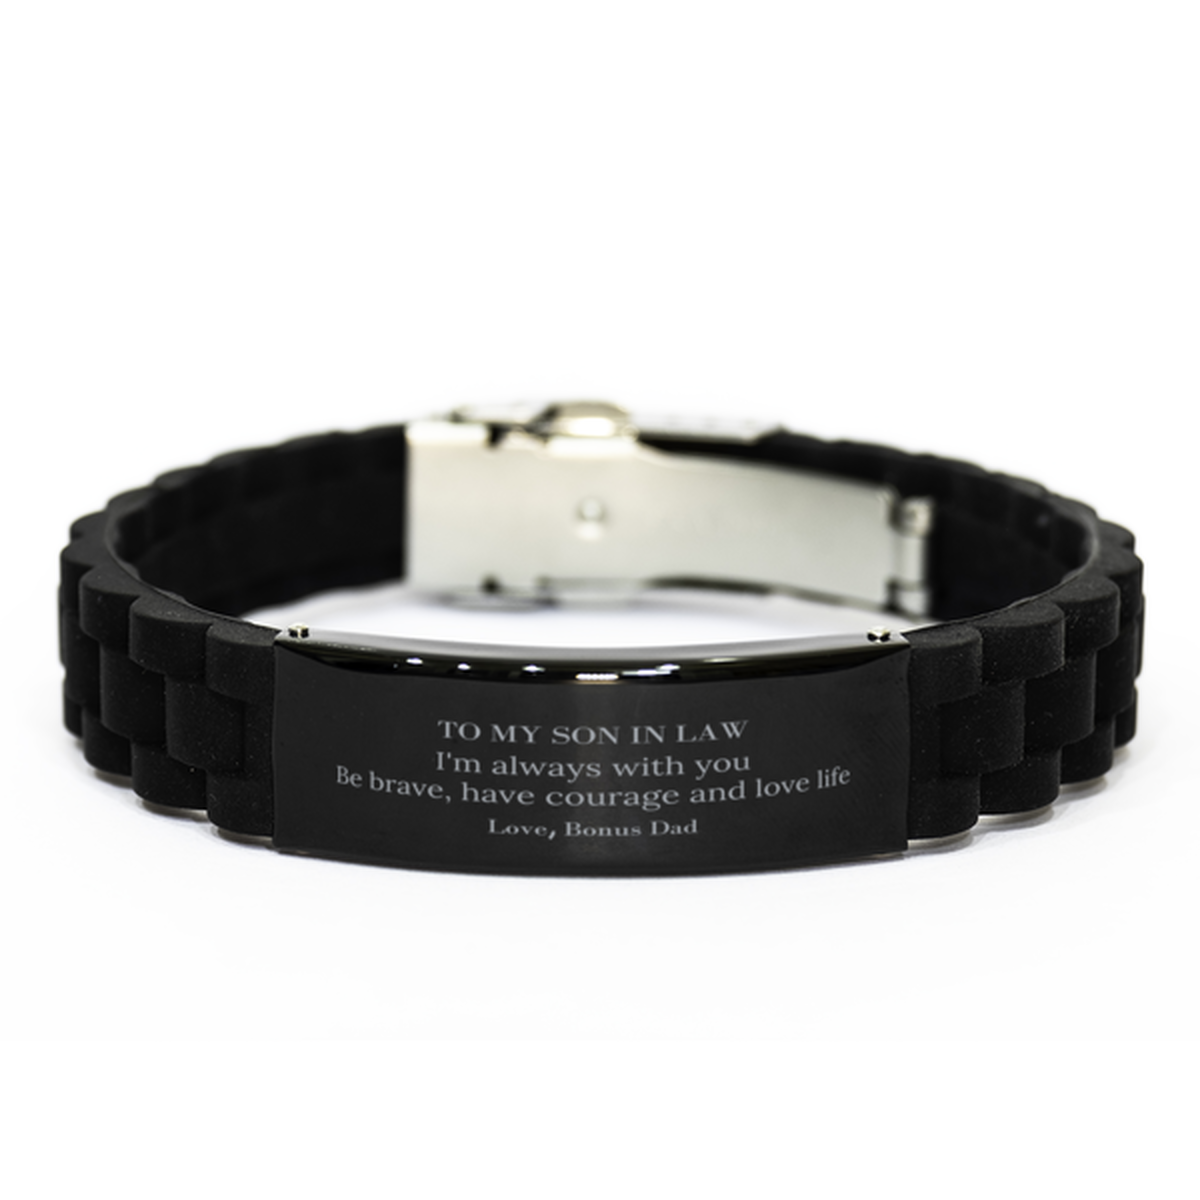 To My Son In Law Gifts from Bonus Dad, Unique Black Glidelock Clasp Bracelet Inspirational Christmas Birthday Graduation Gifts for Son In Law I'm always with you. Be brave, have courage and love life. Love, Bonus Dad